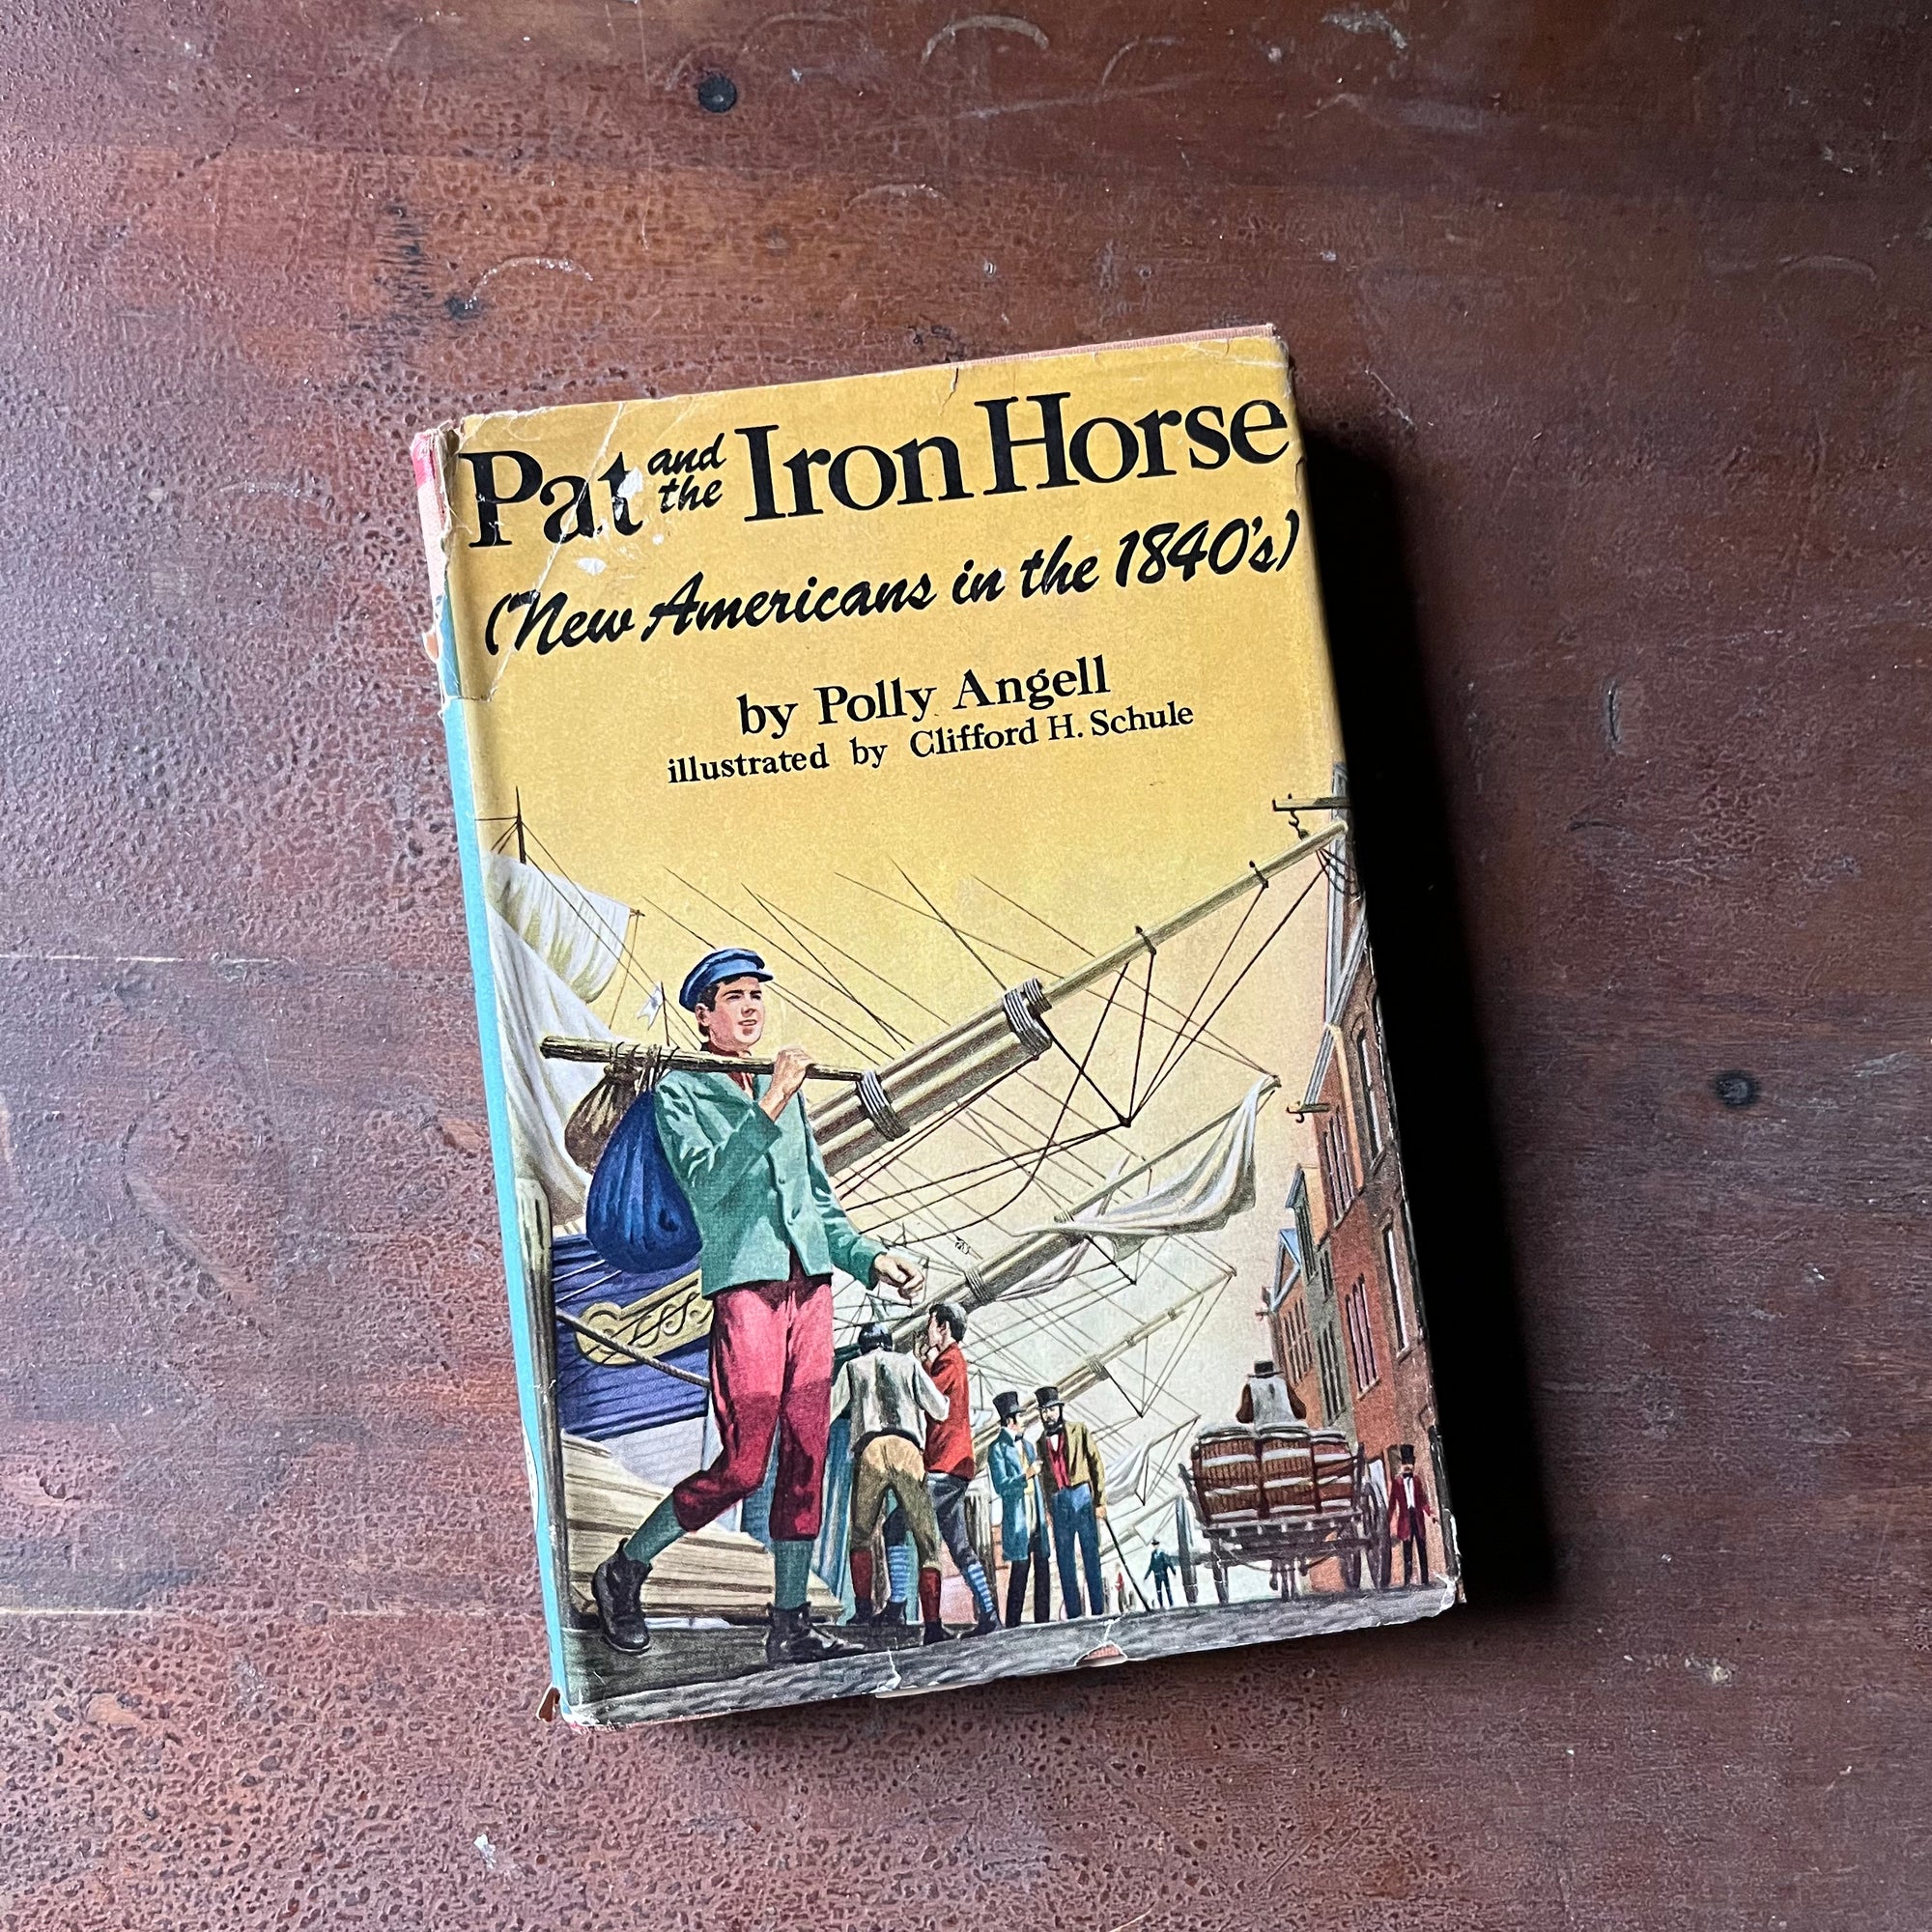 Log Cabin Vintage – vintage children’s book, children’s book, chapter book, American Heritage Series – Pat and the Iron Horse New Americans in the 1840's written by Polly Angell with illustrations by Clifford J. Schule - view of the dust jacket's front cover